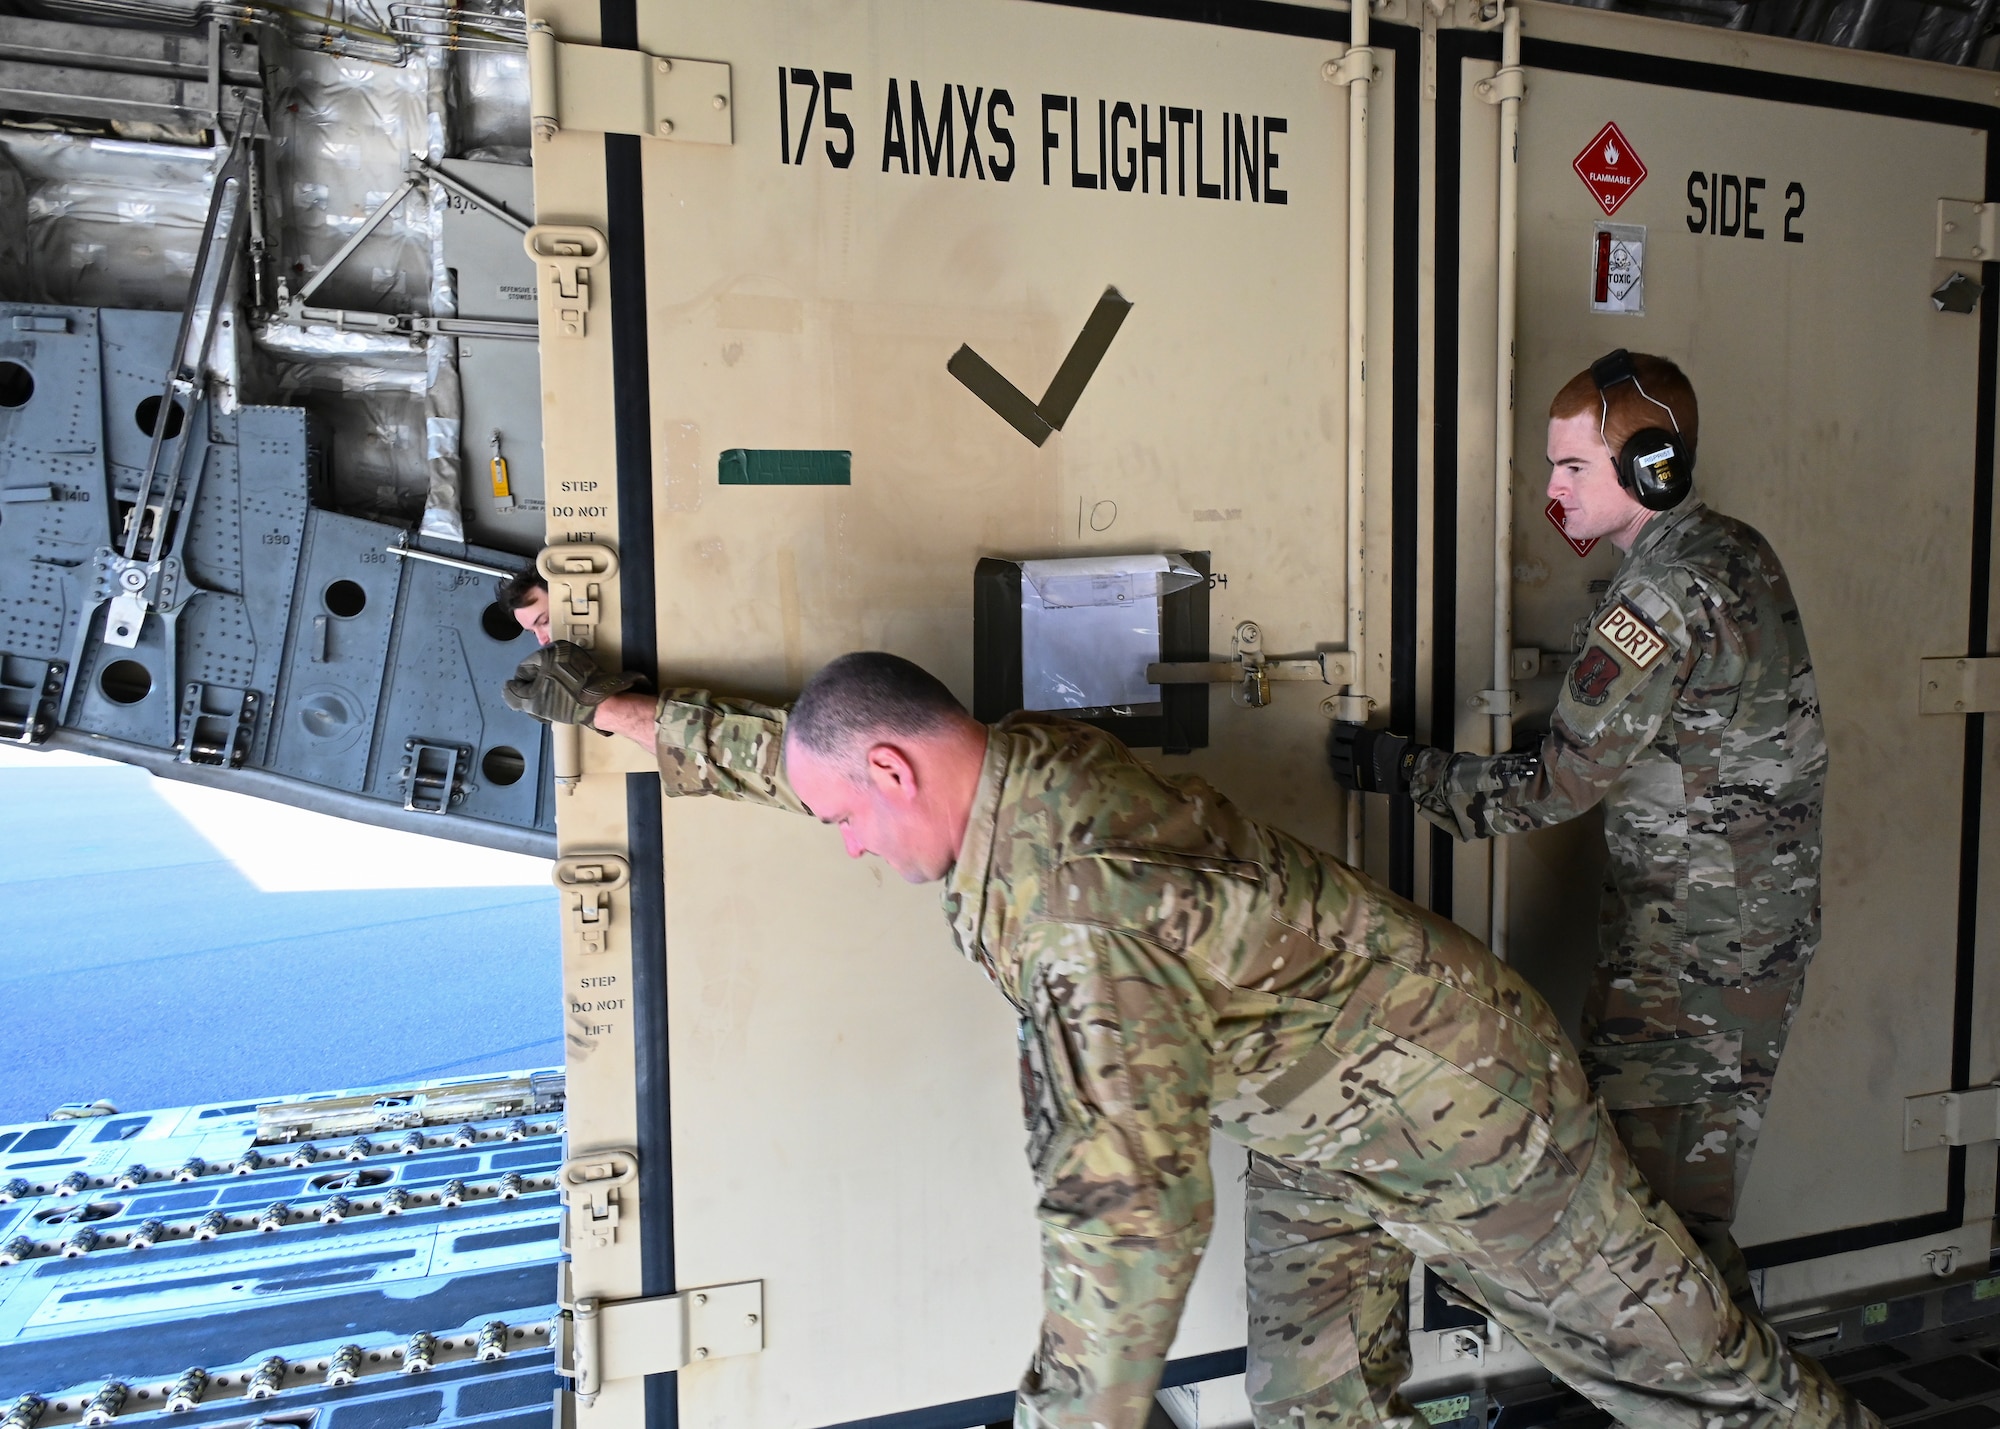 U.S. Air Force Senior Master Sgt. Joseph Windle (left), a loadmaster assigned to the 167th Airlift Wing, West Virginia Air National Guard, and U.S. Air Force Tech. Sgt. Ryan Springer, an air transportation specialist assigned to the 167th Airlift Wing, West Virginia Air National Guard, unload cargo from a C-17 Globemaster III aircraft during the DEFENDER-Europe 22 exercise, May 23, 2022, in Kuressaare, Estonia.